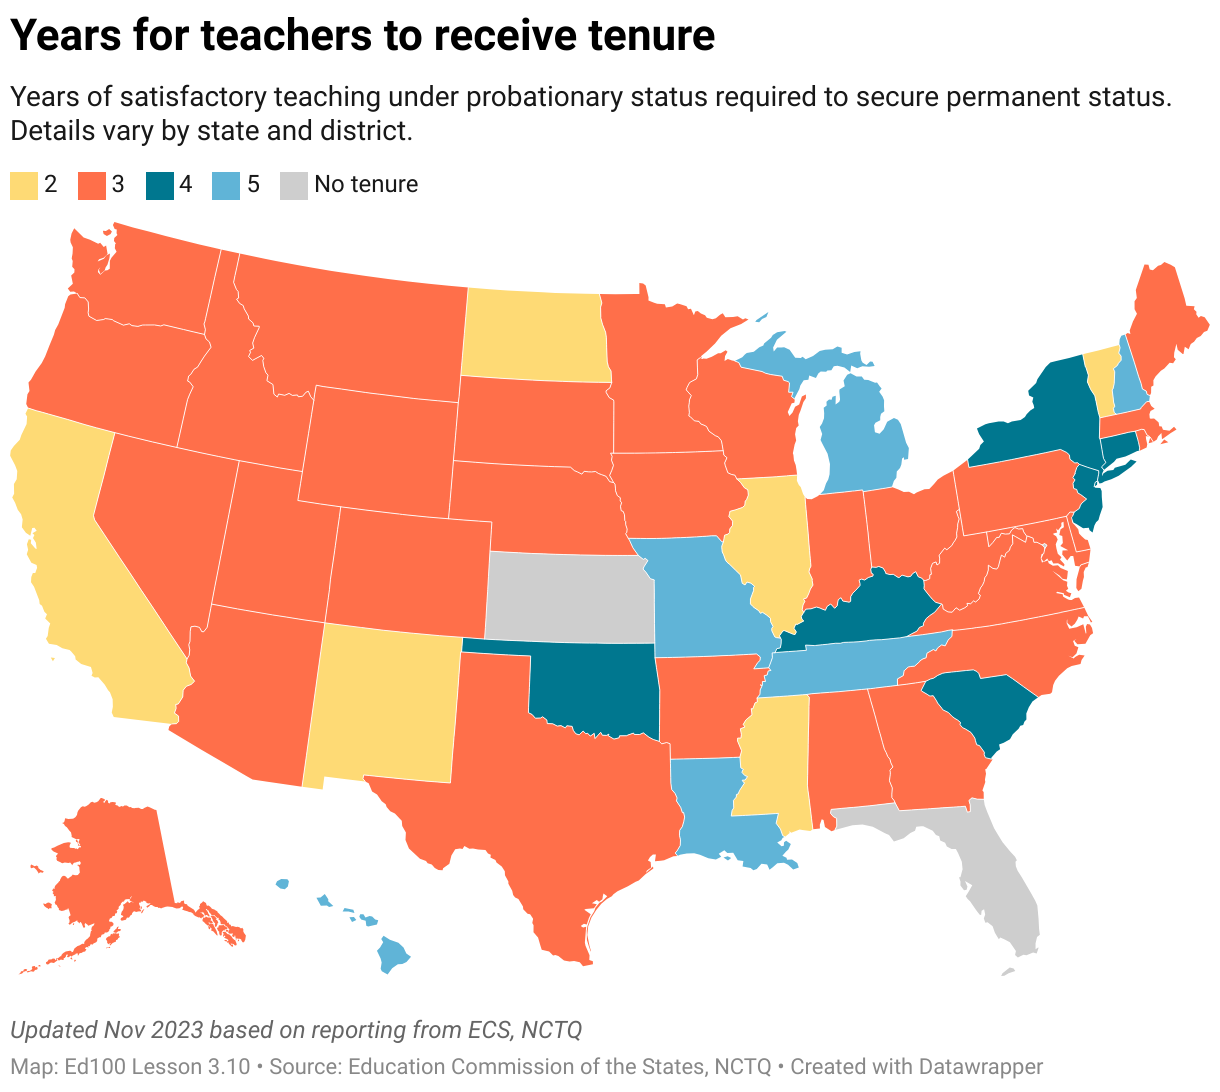 Years for teachers to receive tenure